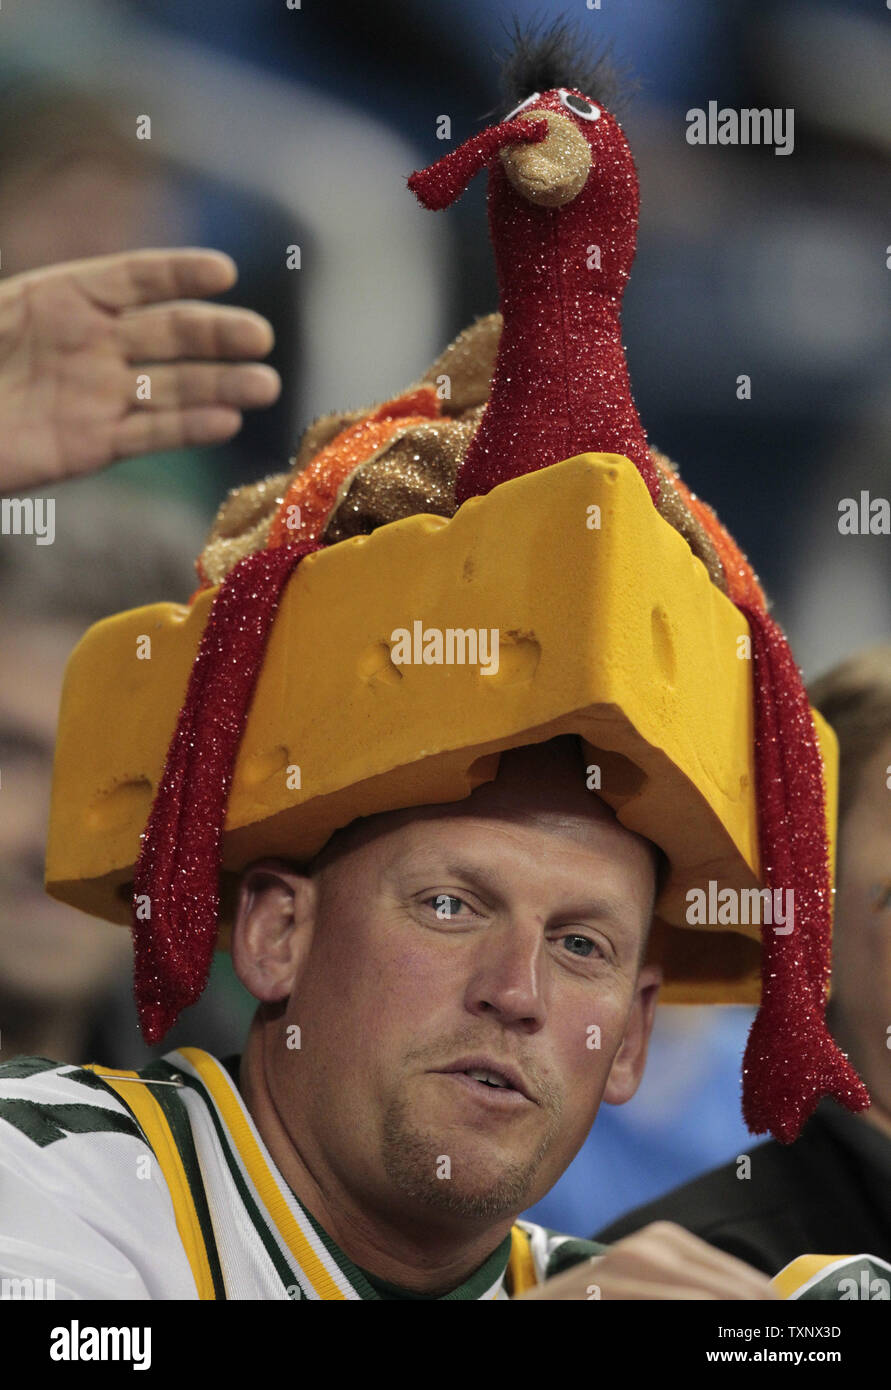 Green Bay Packers fan Bob Ewest of Milwaukee in the stands as the Packers play the Detroit Lions during in Detroit on November 24, 2011.  The Packers beat the Lions 27-15. UPI/Jeff Kowalsky Stock Photo